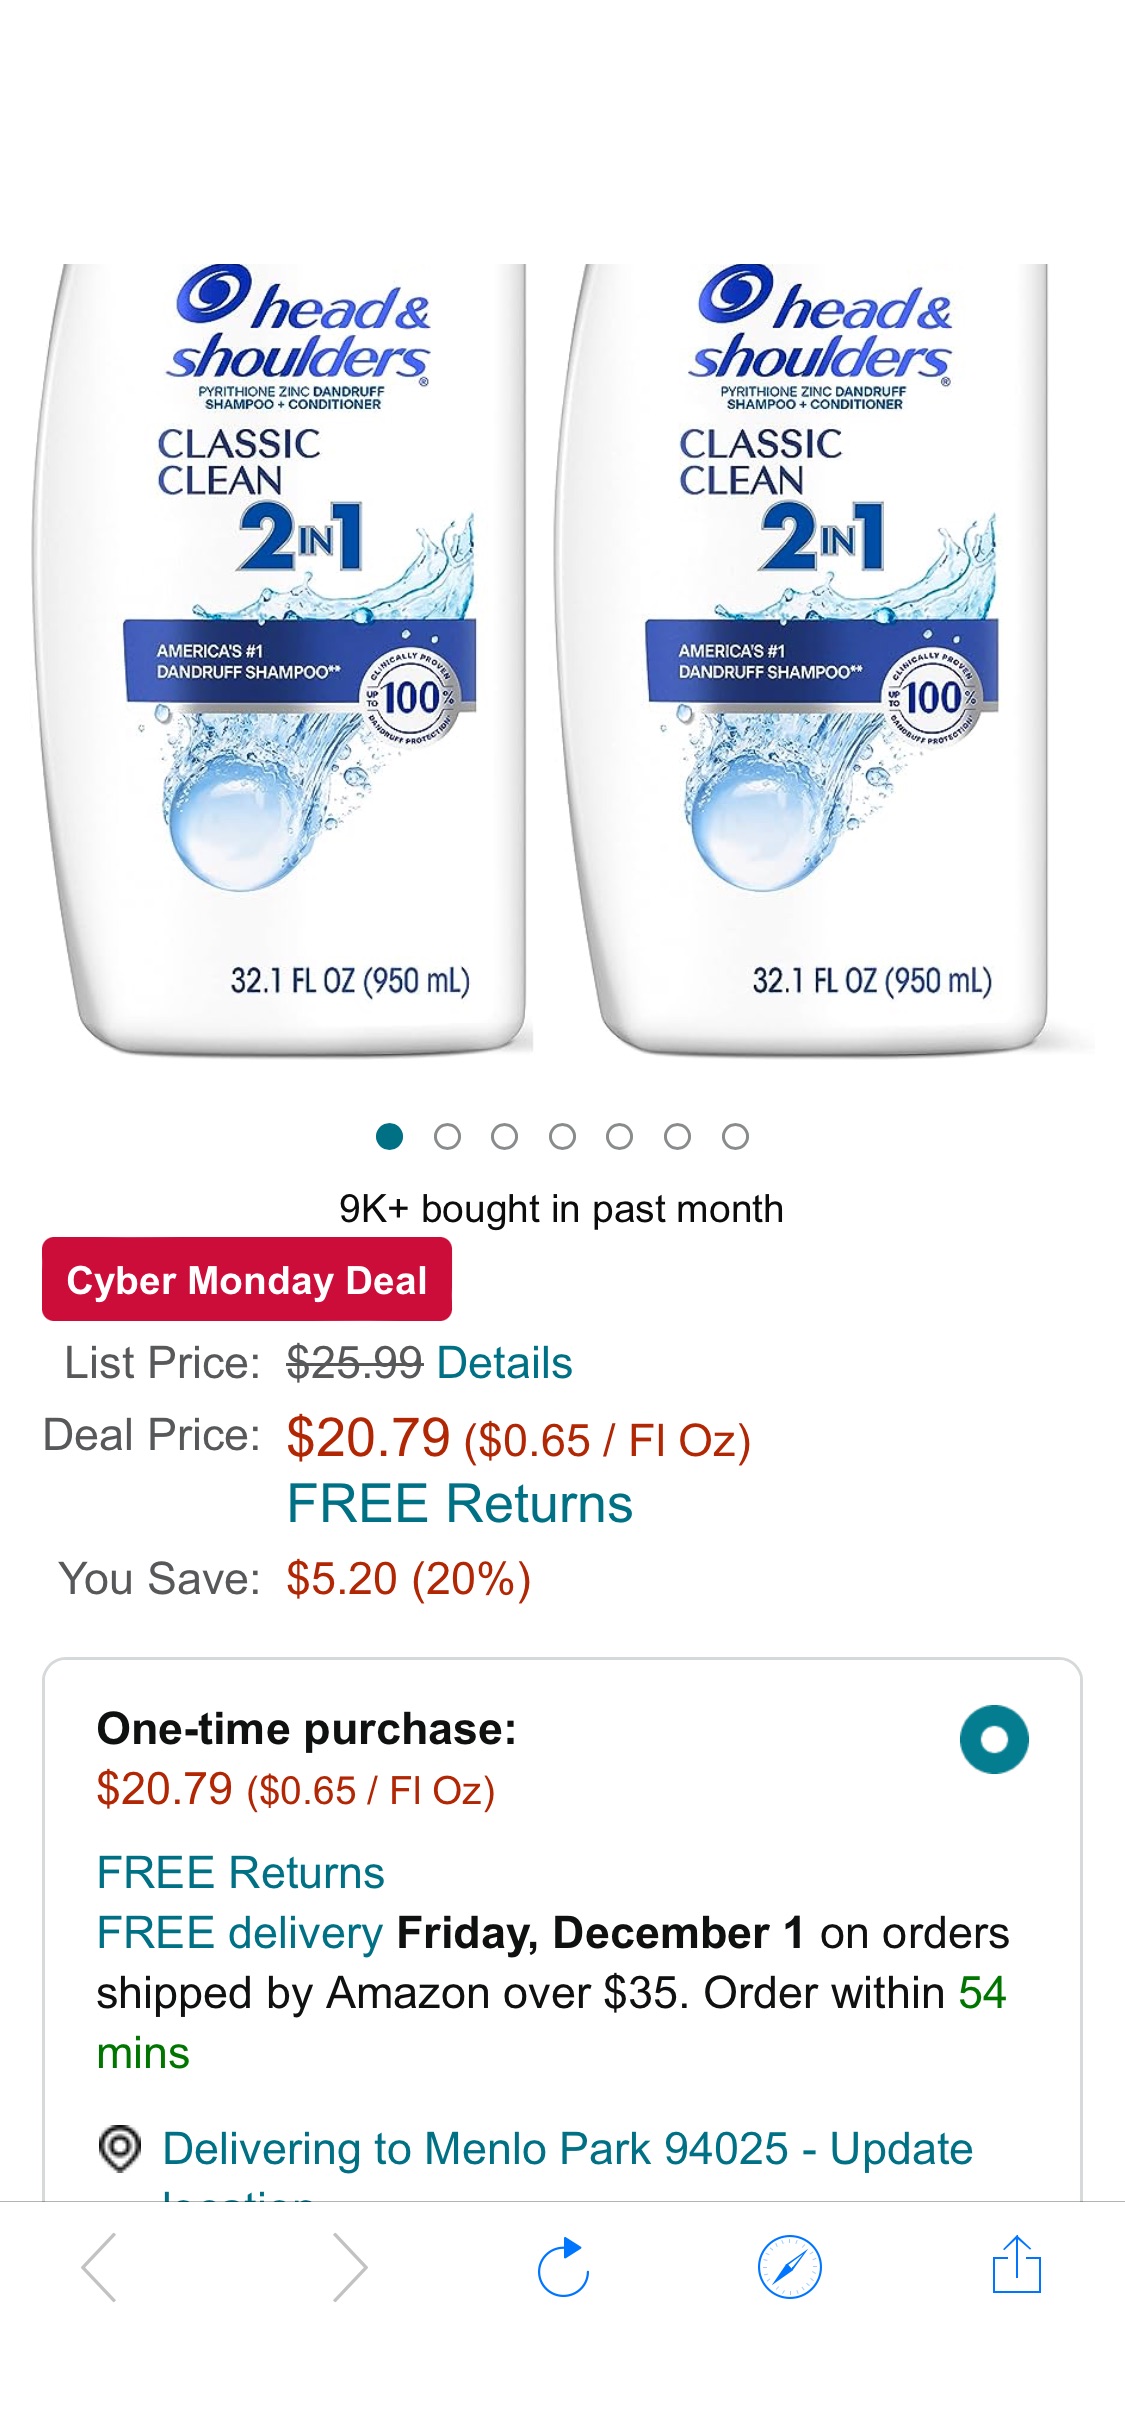 Amazon.com : Head & Shoulders Shampoo and Conditioner 2 in 1, Anti Dandruff Treatment & Scalp Care, Classic Clean Scent, for All Hair Types including Color Treated, Curly or Textured Hair, 32.1 fl oz,